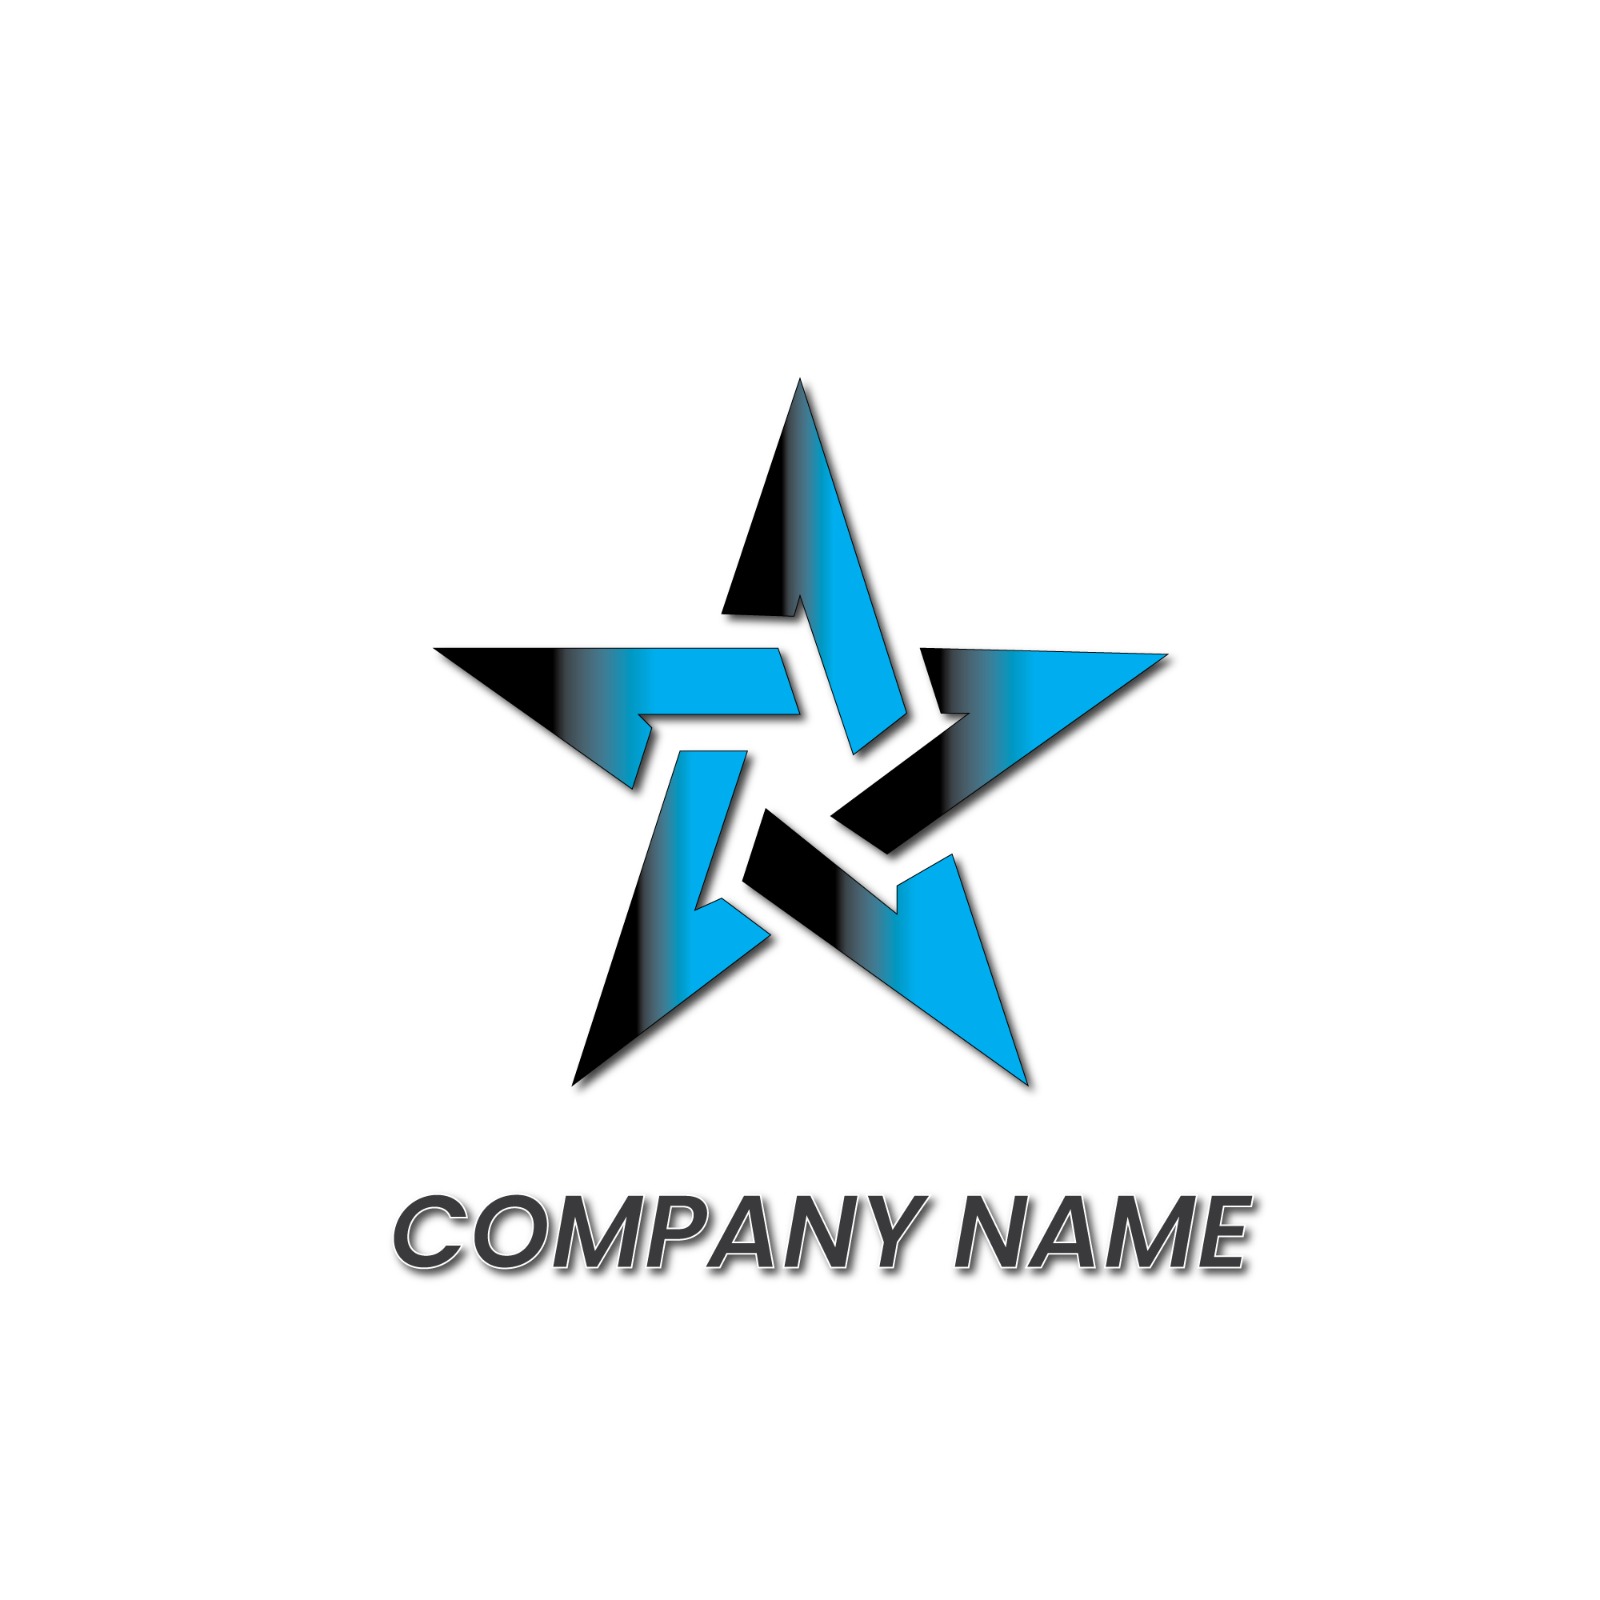 Best Logo for Company cover image.